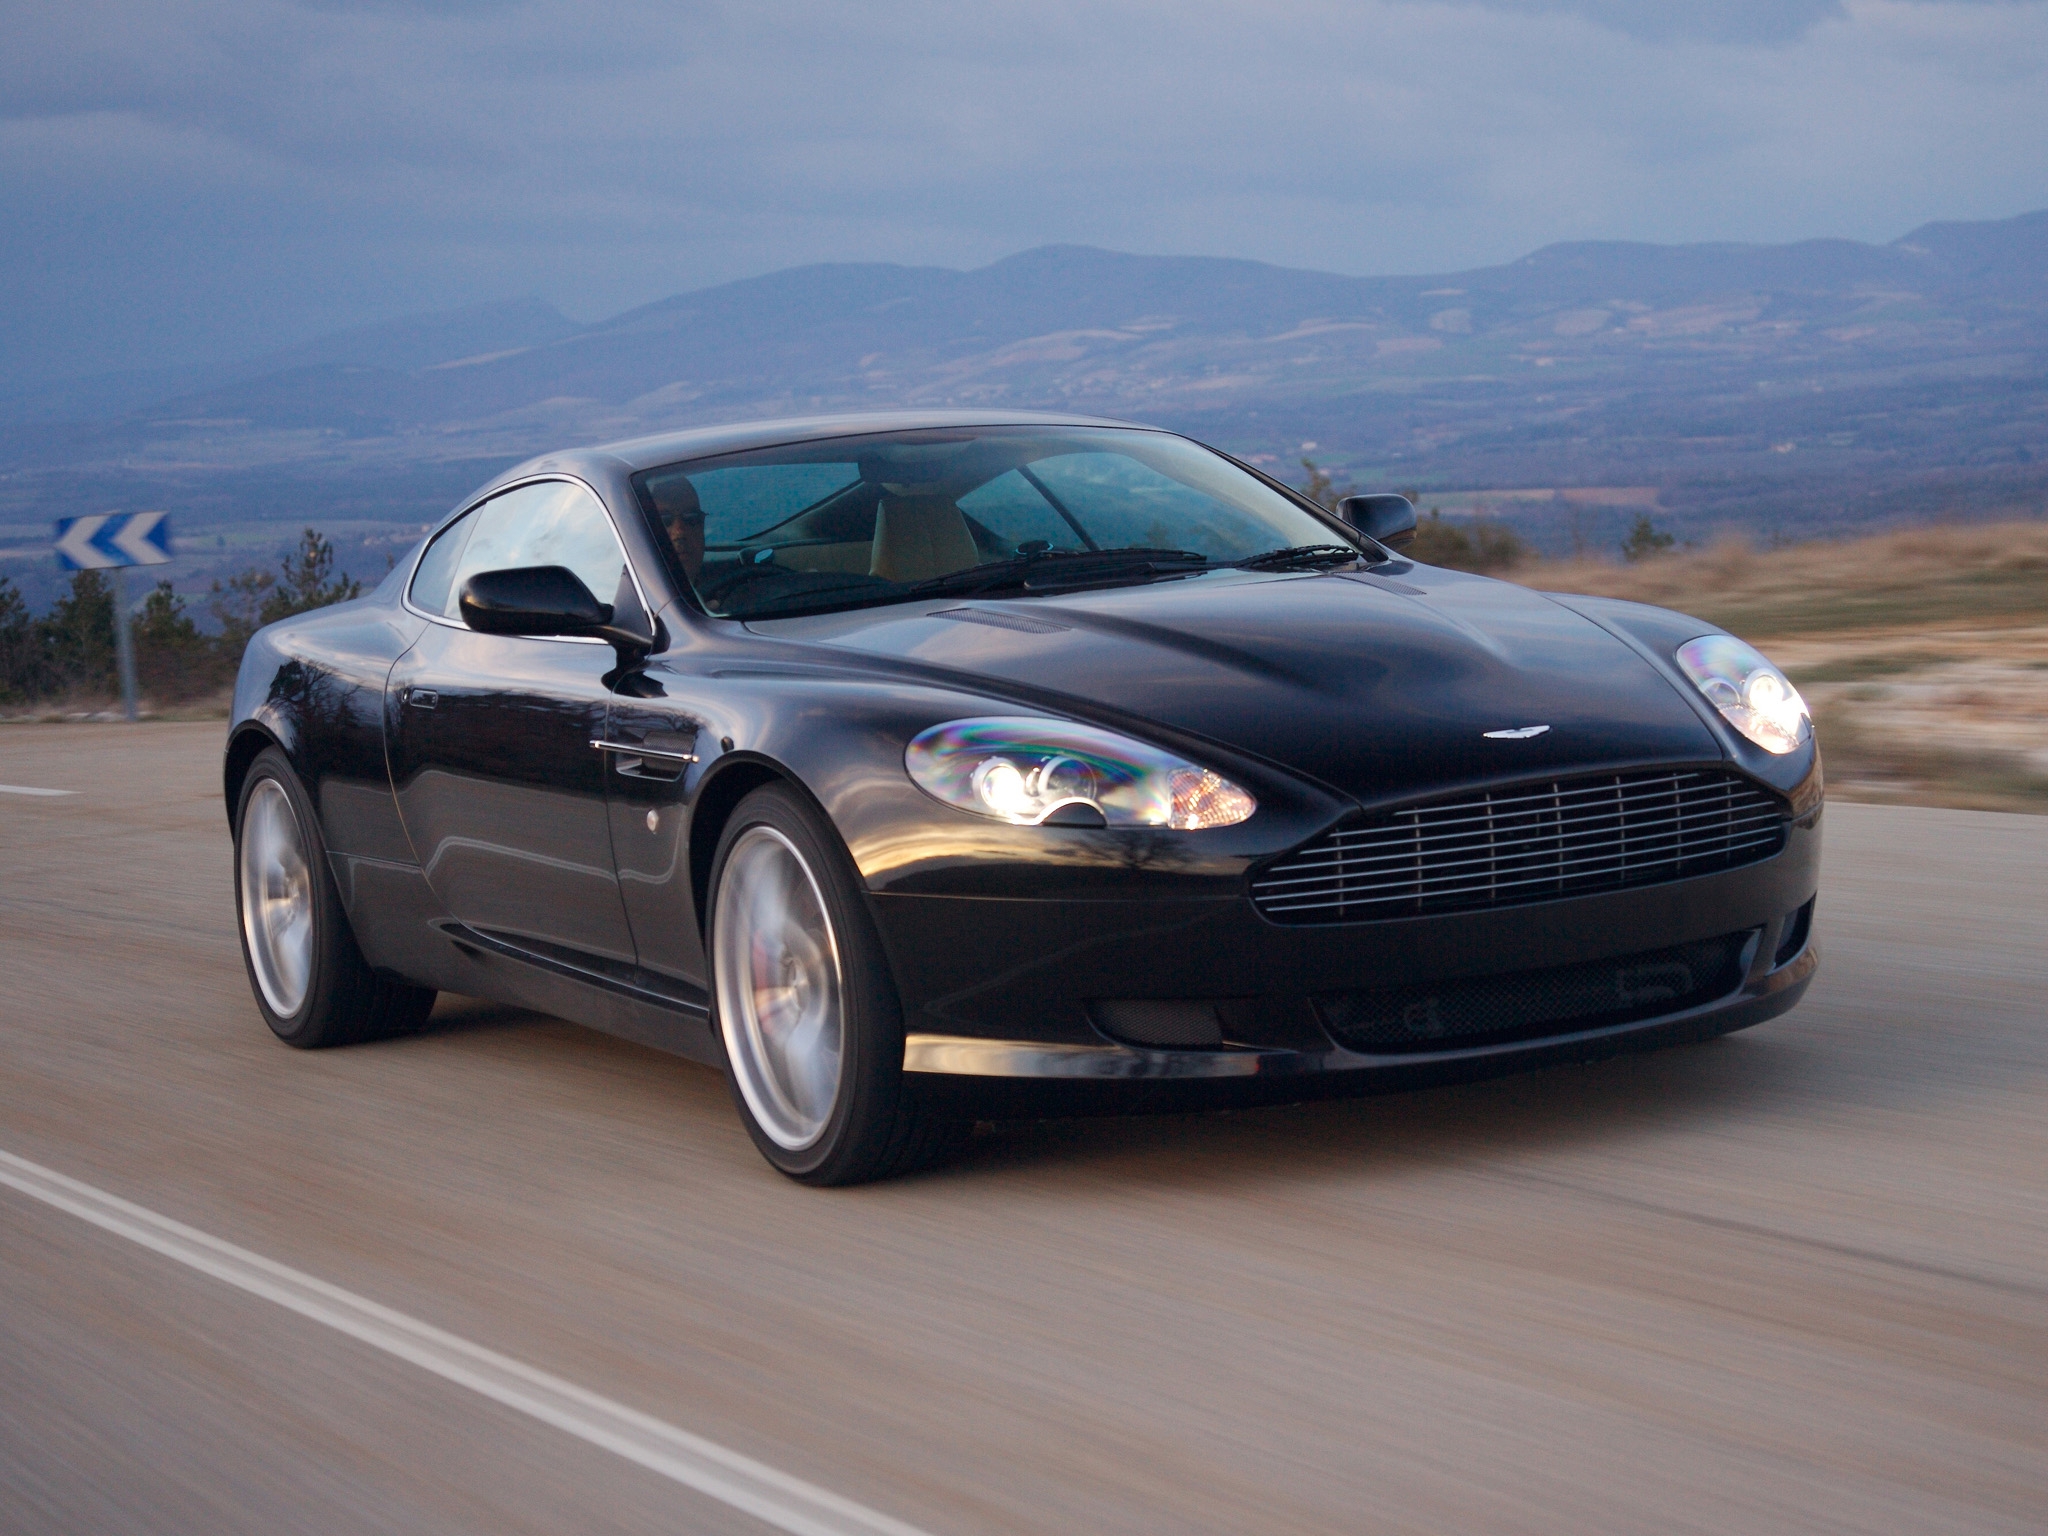 speed, db9, sports, auto, nature, mountains, aston martin, cars, blue, asphalt, front view, style, 2006 download HD wallpaper